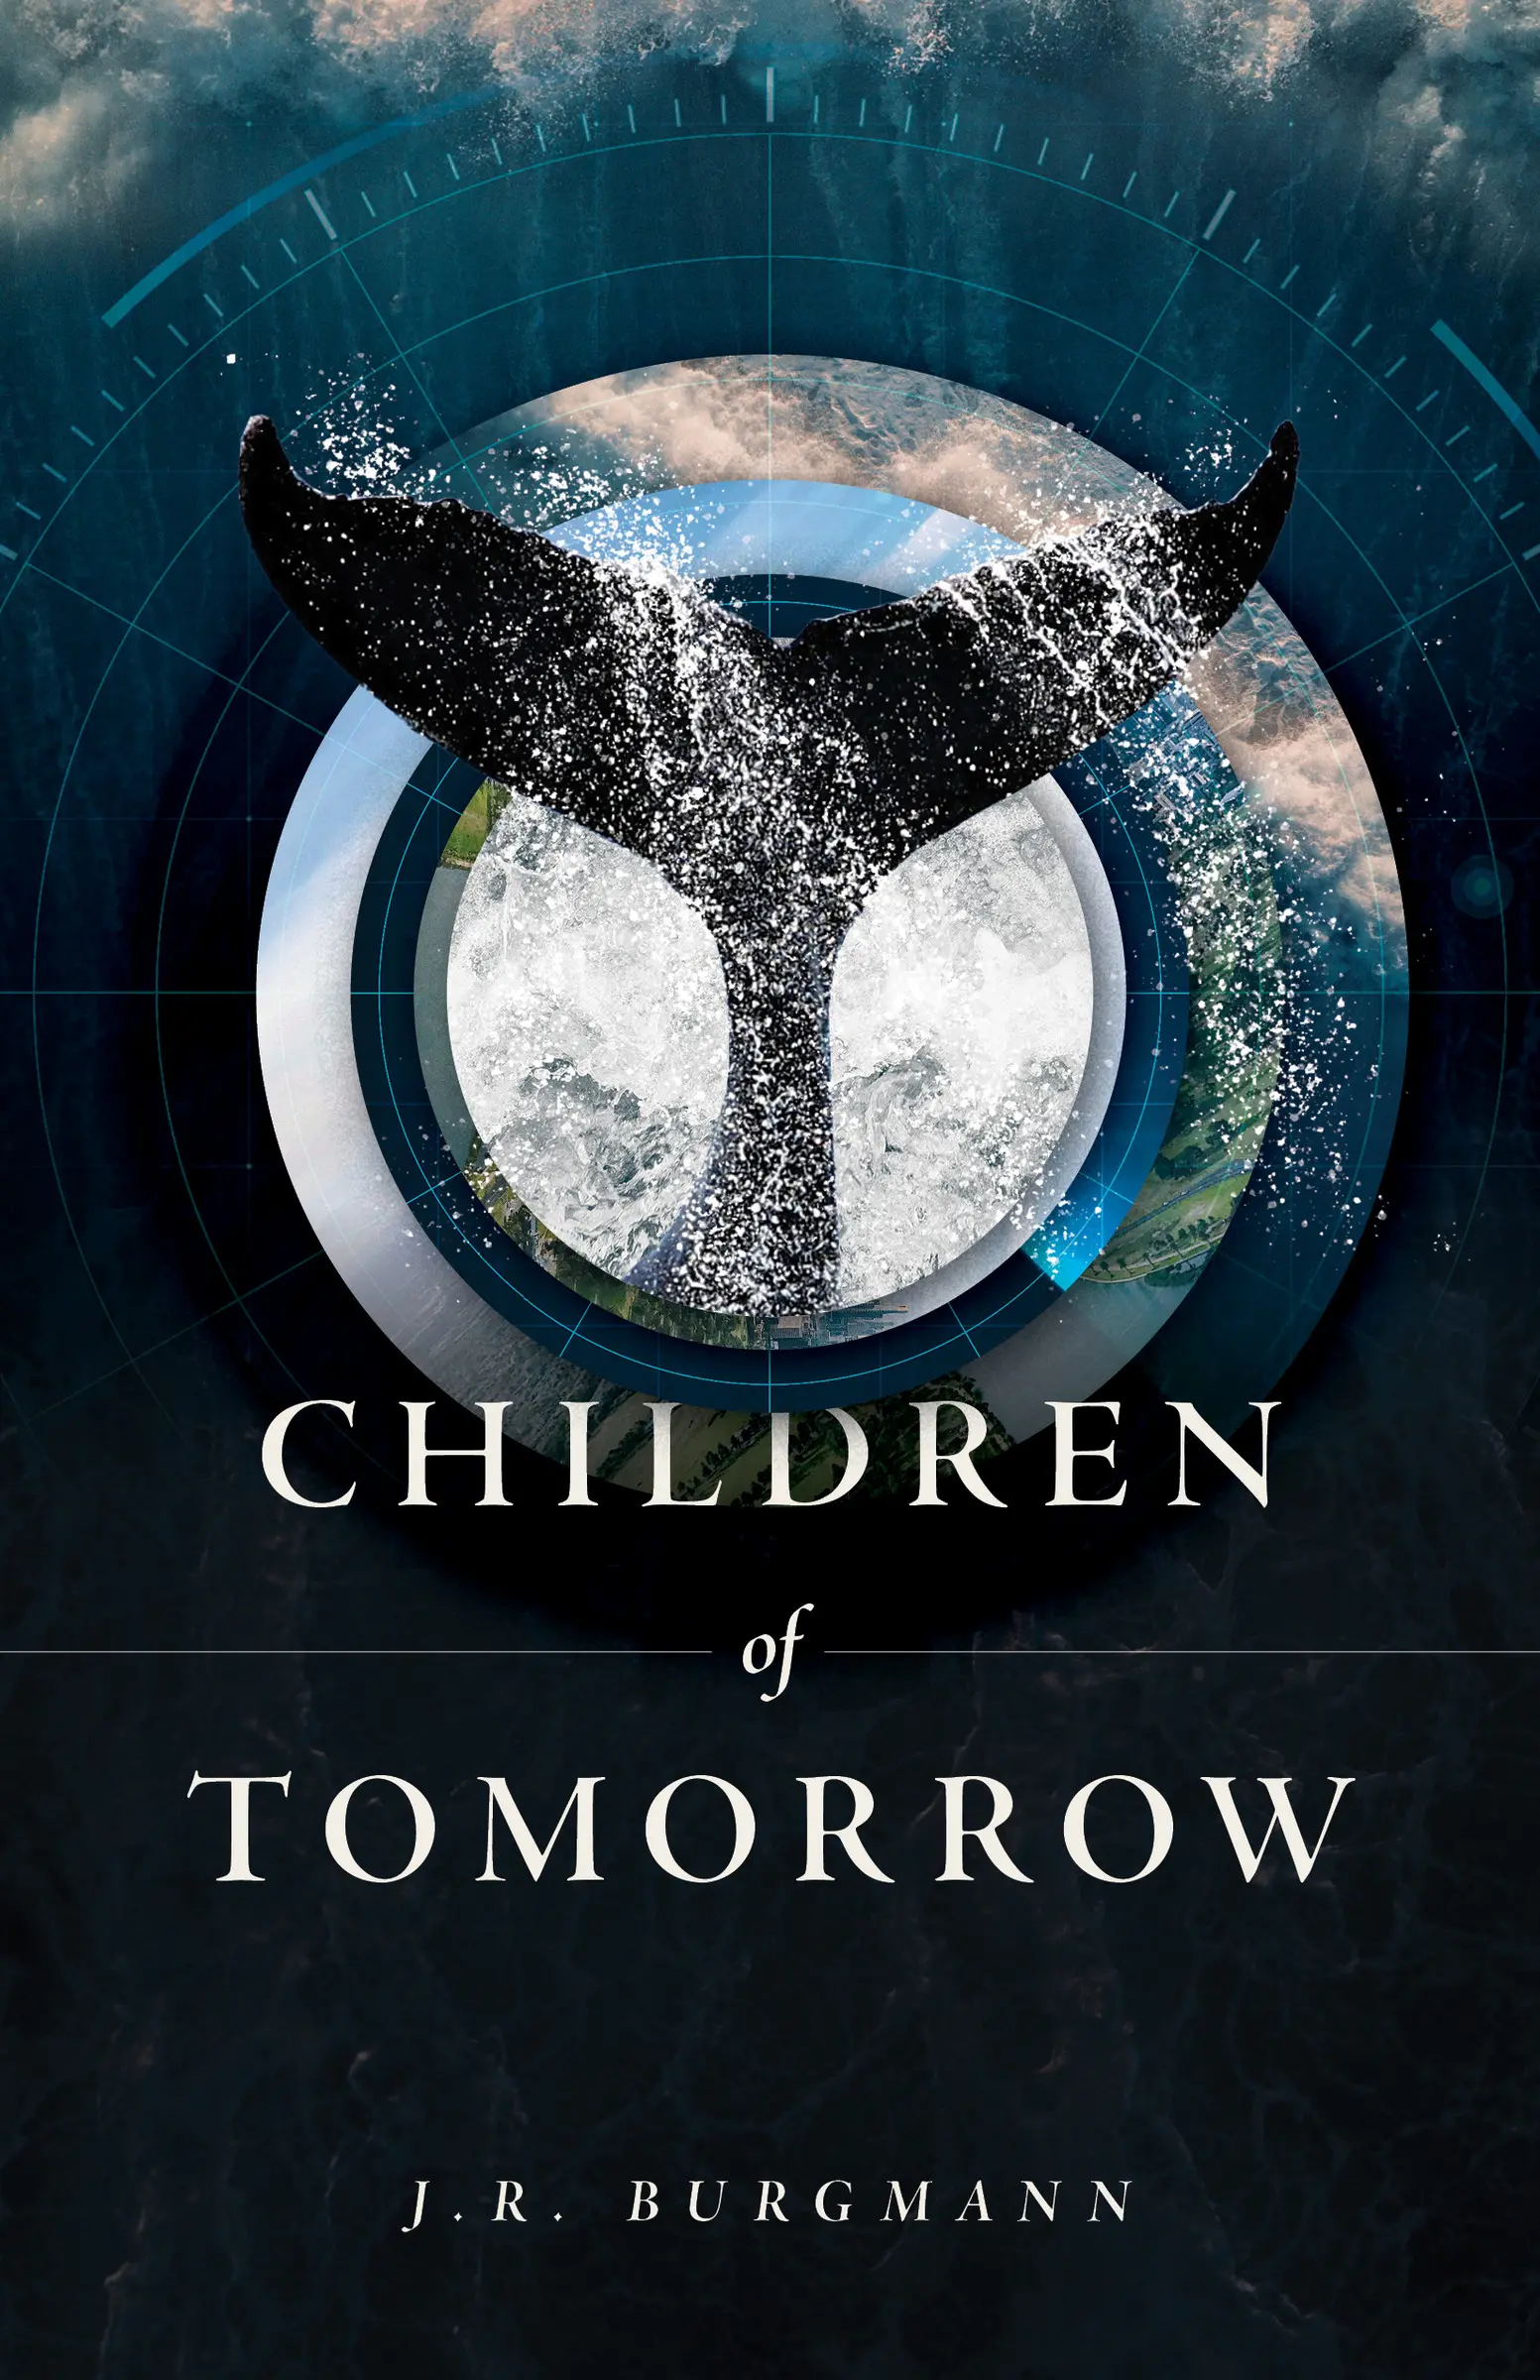 The cover of Children of Tomorrow by J.R. Burgmann. A whale tail is visible through a porthole, the water spraying dramatically.